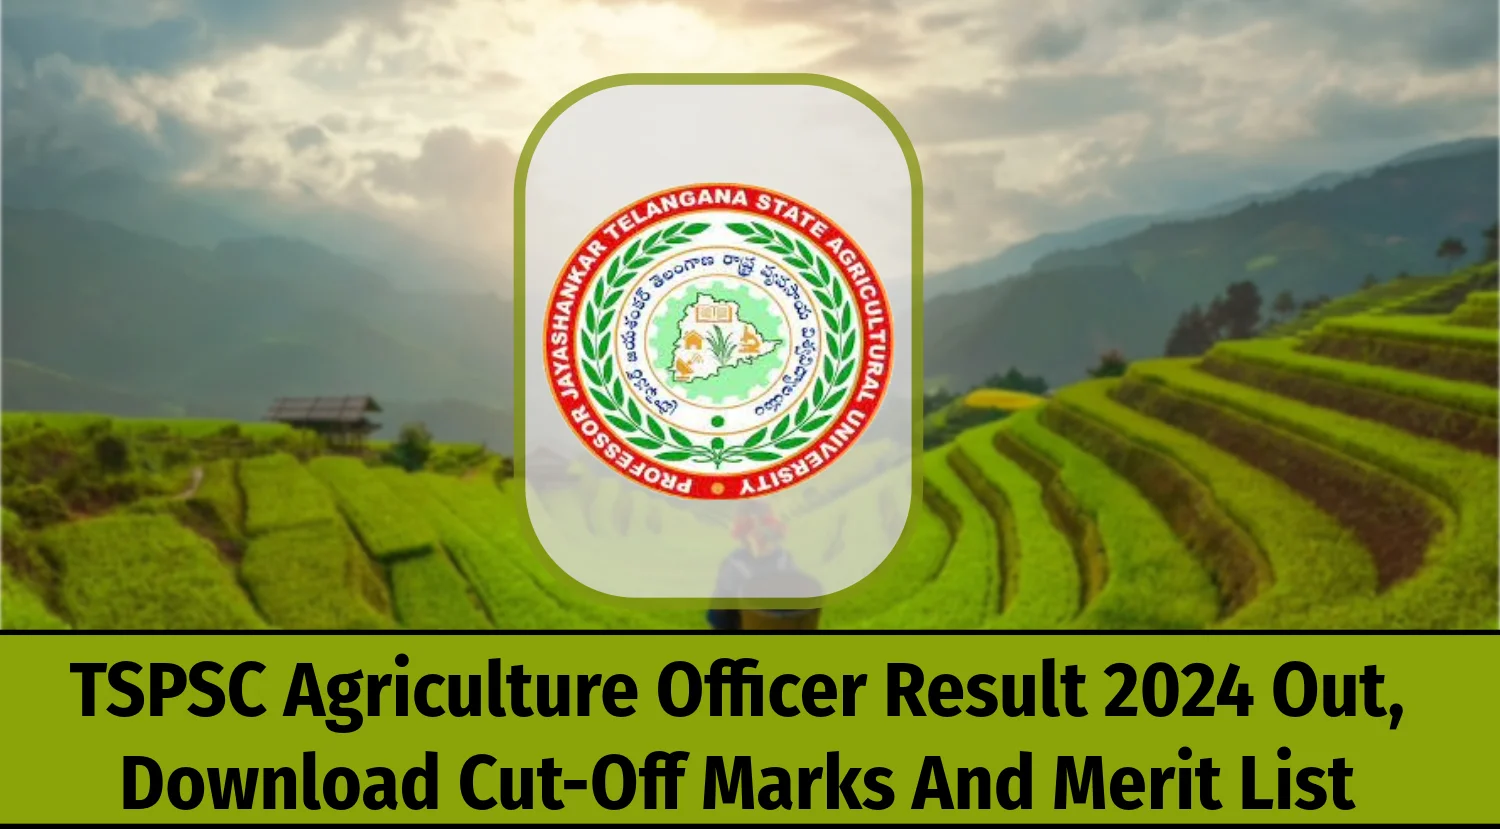 TSPSC Agriculture Officer Result 2024 Out, Download Cut-Off Marks And Merit List